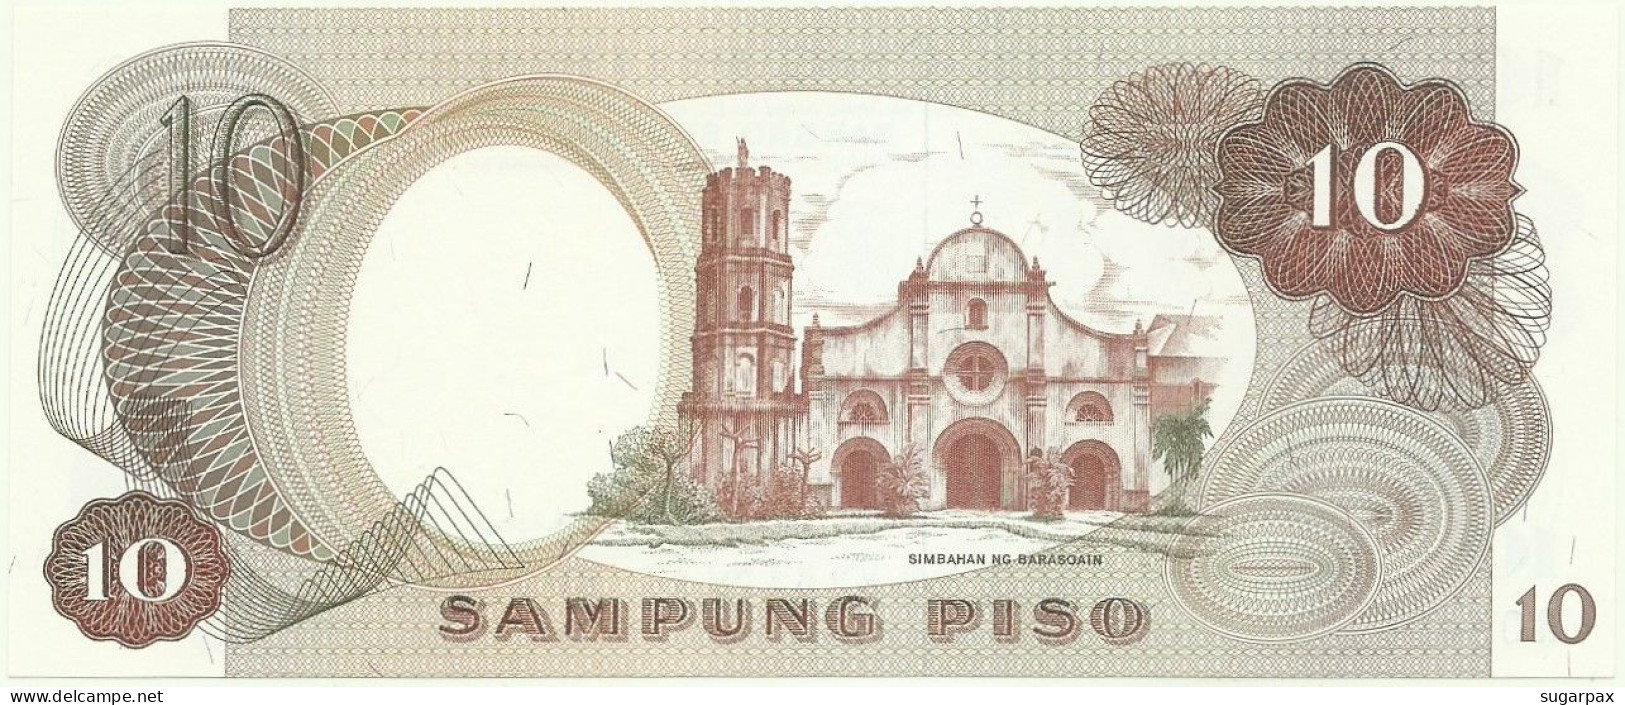 Philippines - 10 Piso - ND ( 1970s ) - Pick 144.b - Unc. - Sign. 8 - Serie R - Filipinas